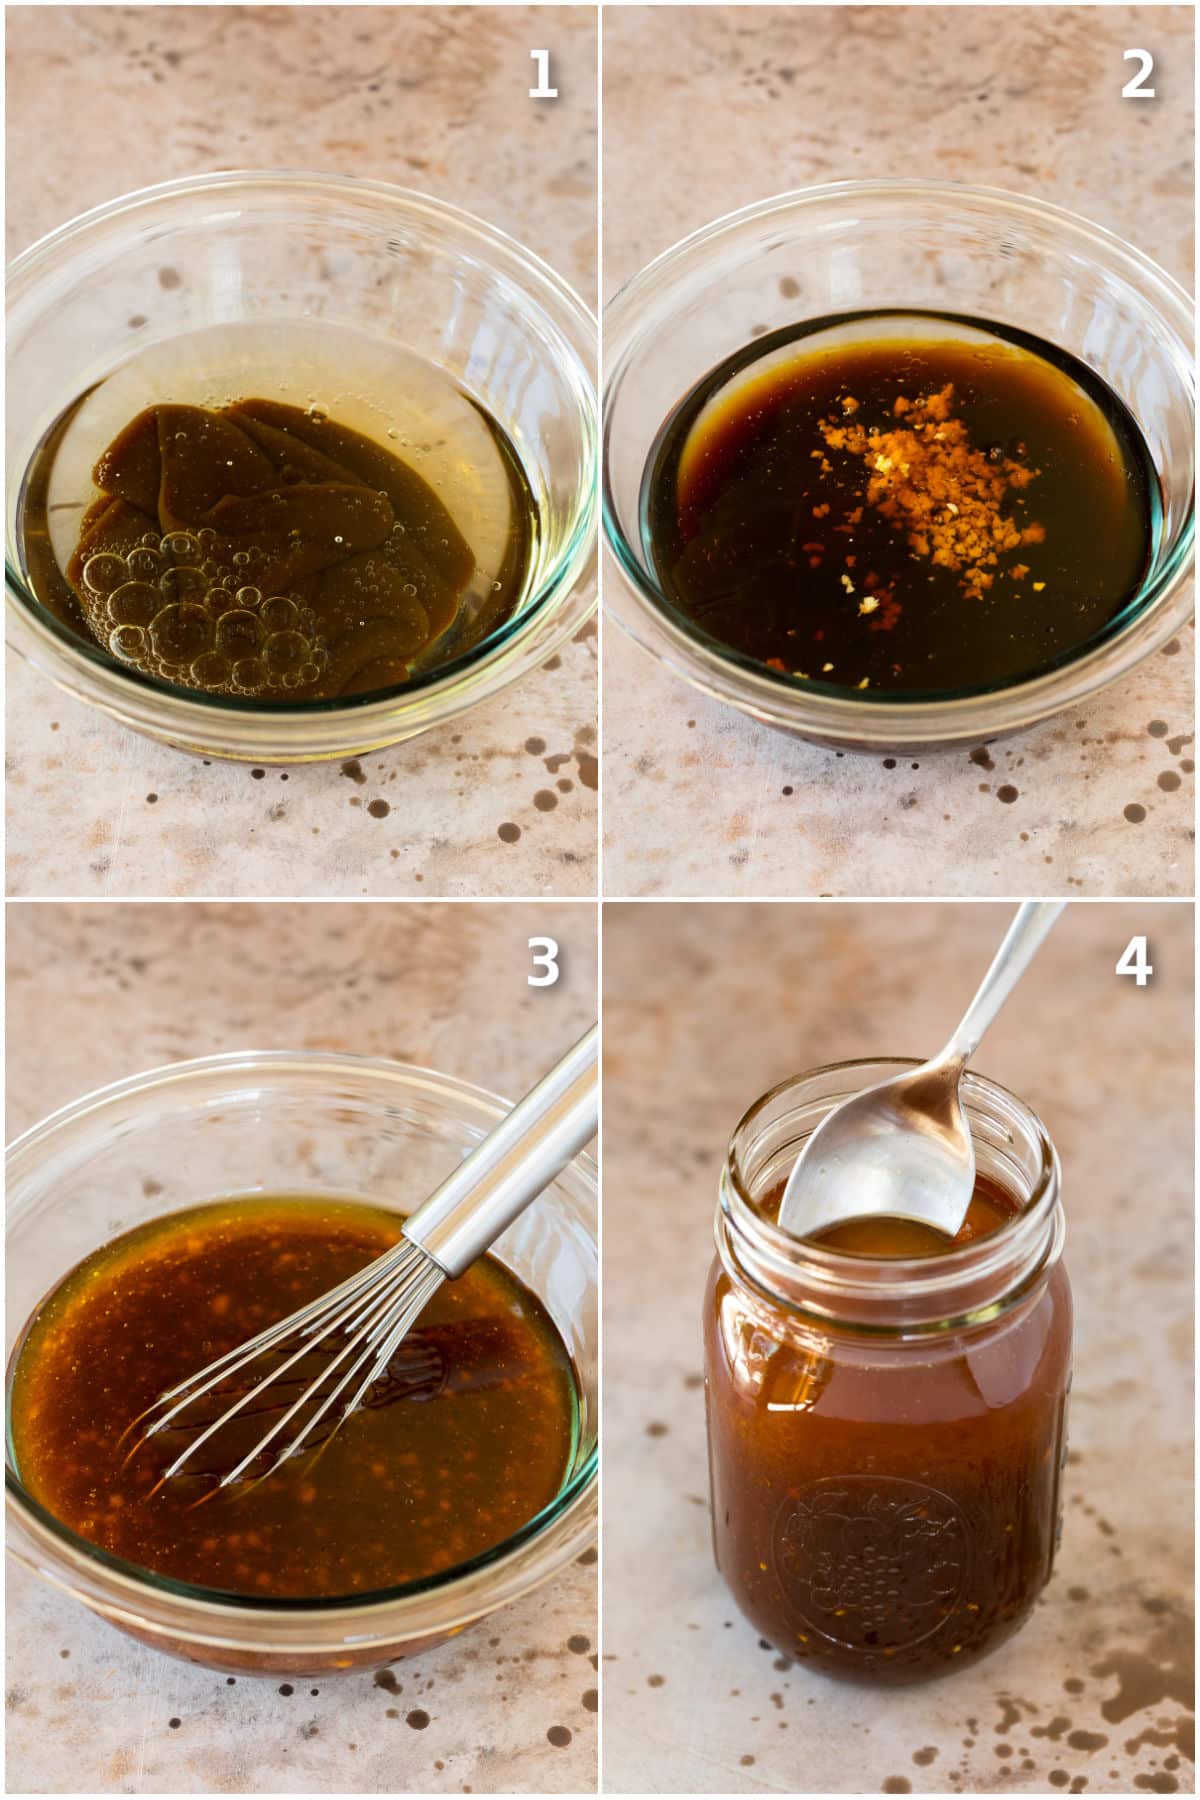 Step by step shots showing how to make salad dressing.